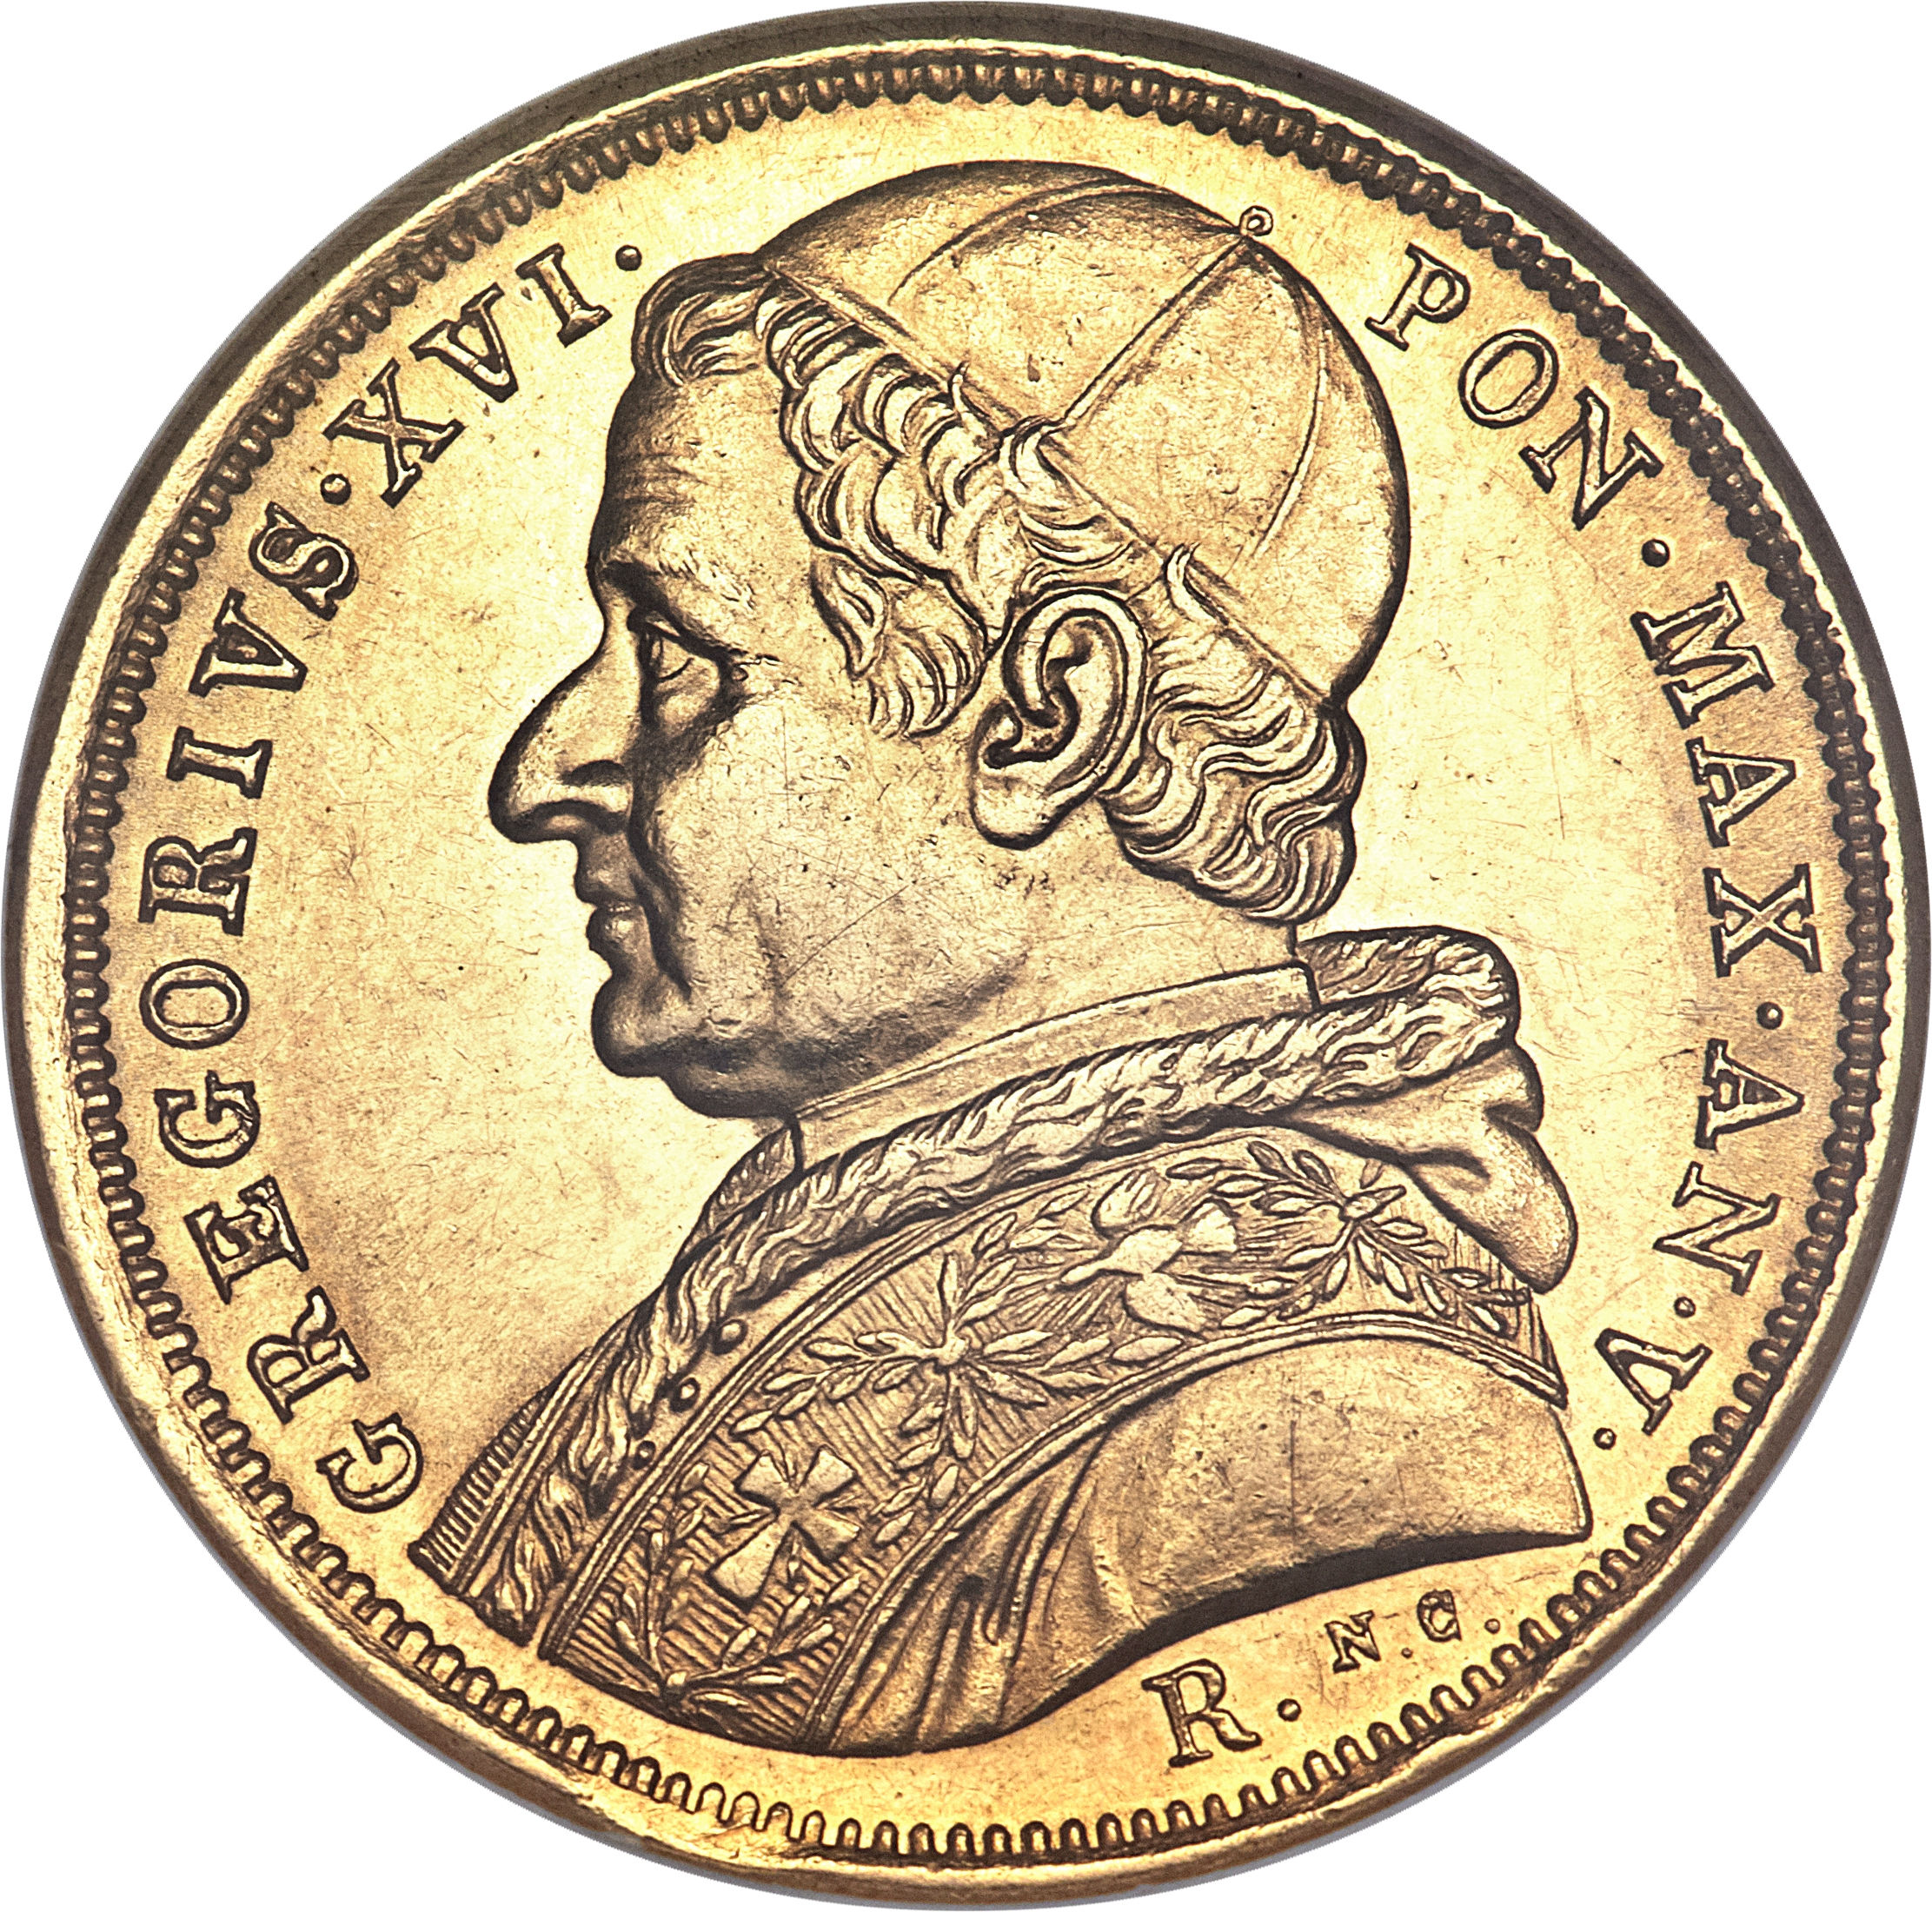 A king's face carved on a golden Italian Scudo coin